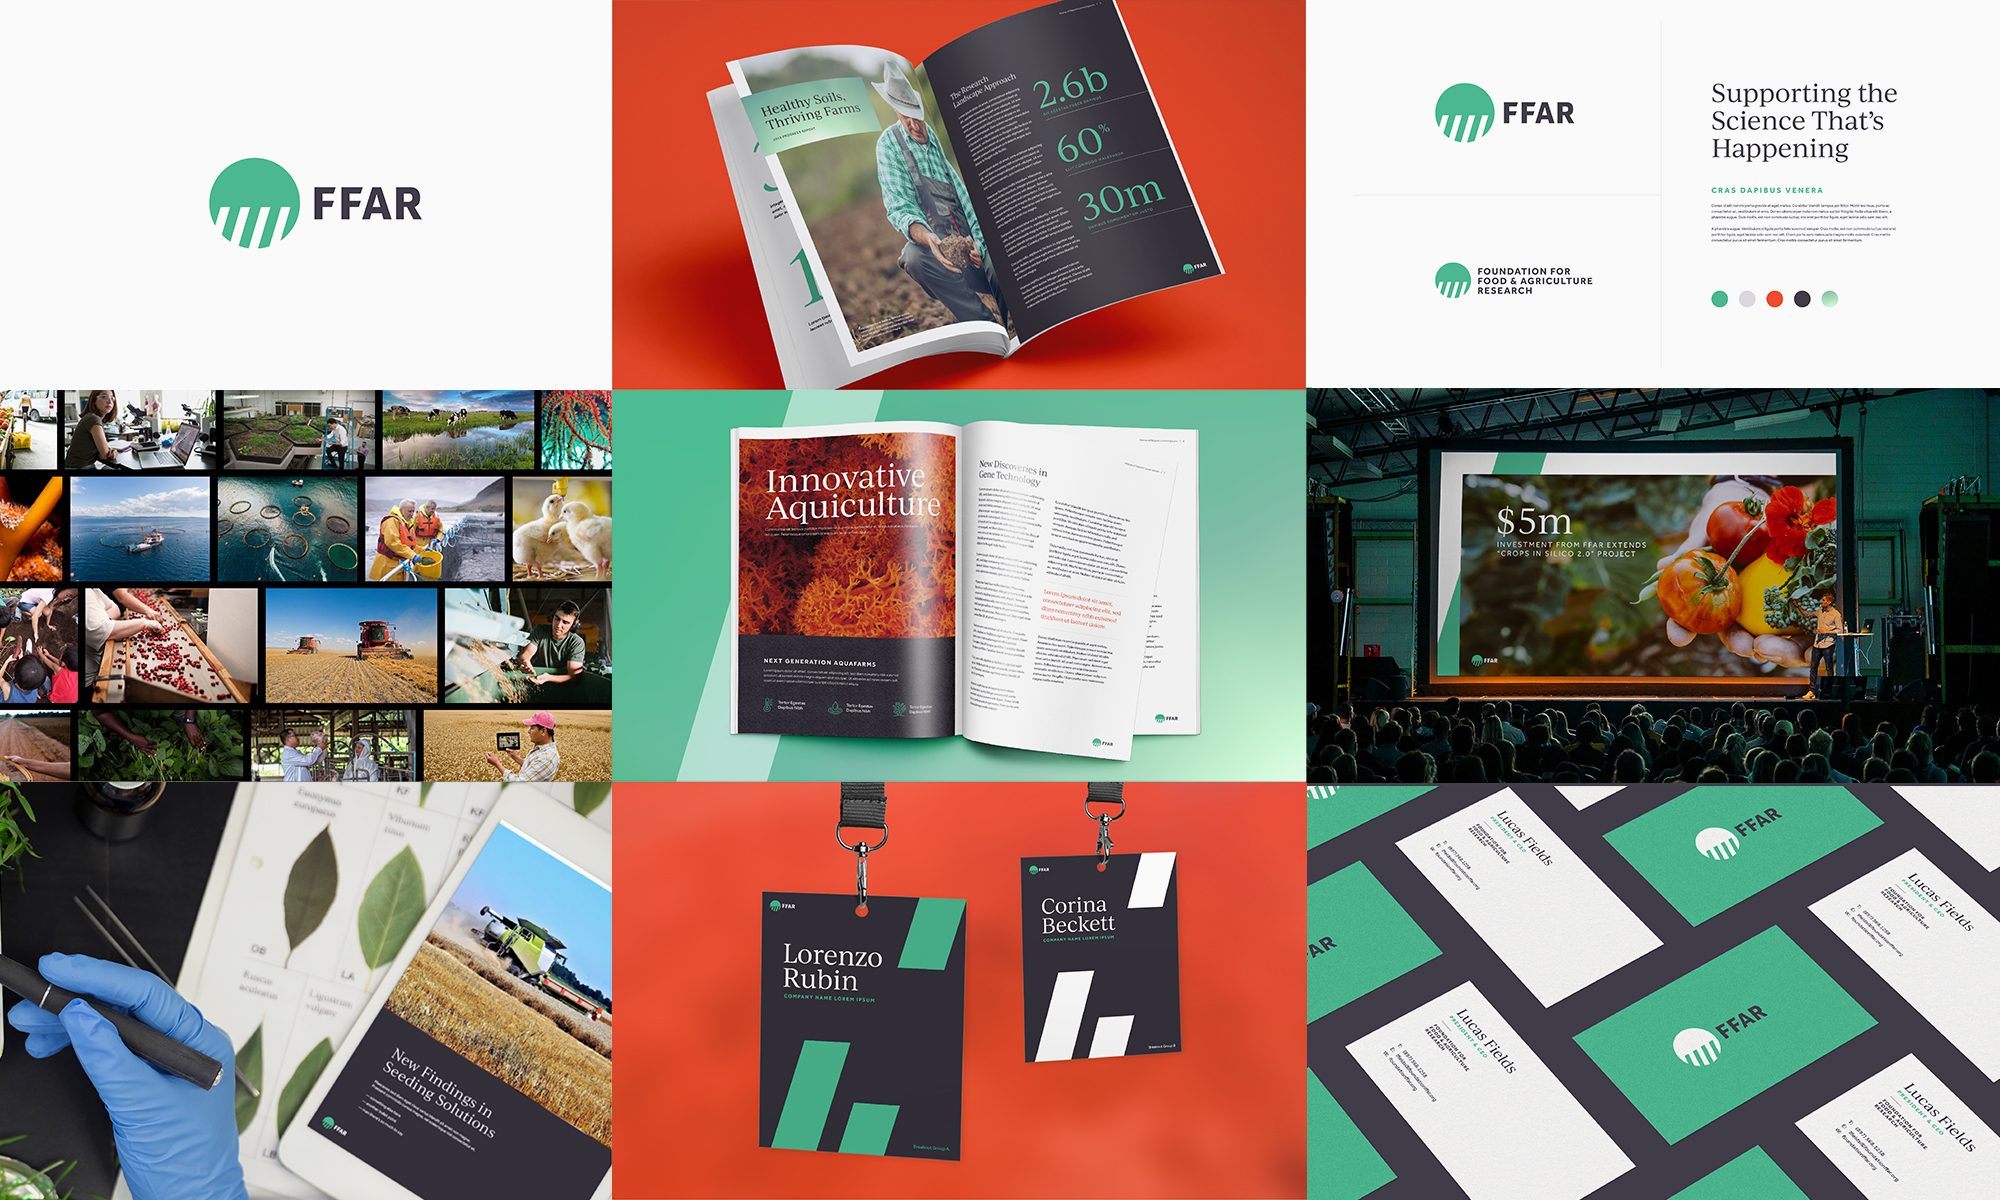 FFAR collage of brand elements and applications